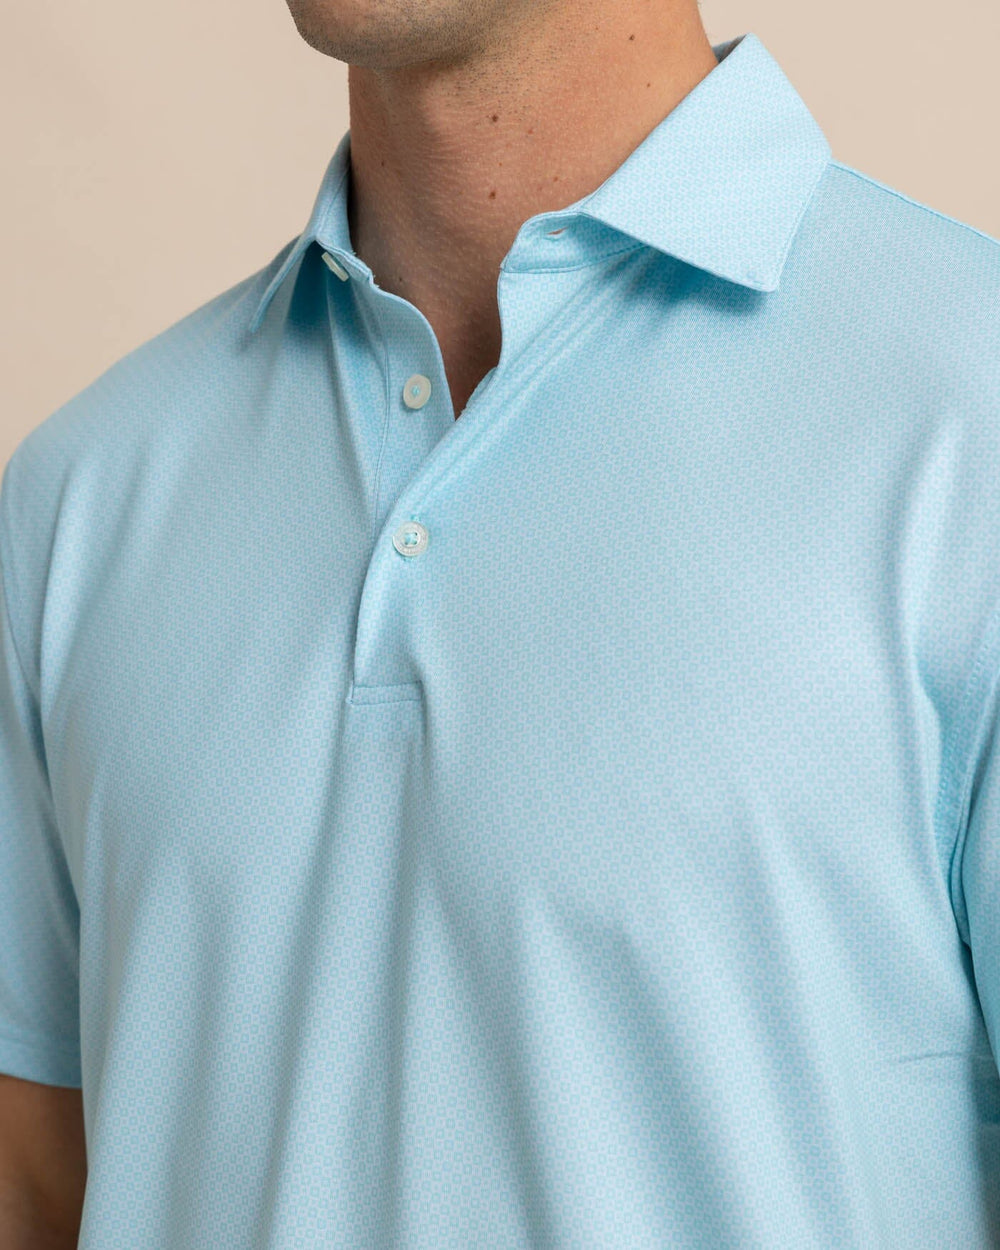 The detail view of the Southern Tide Driver Coastal Geo Polo Shirt by Southern Tide - Chilled Blue